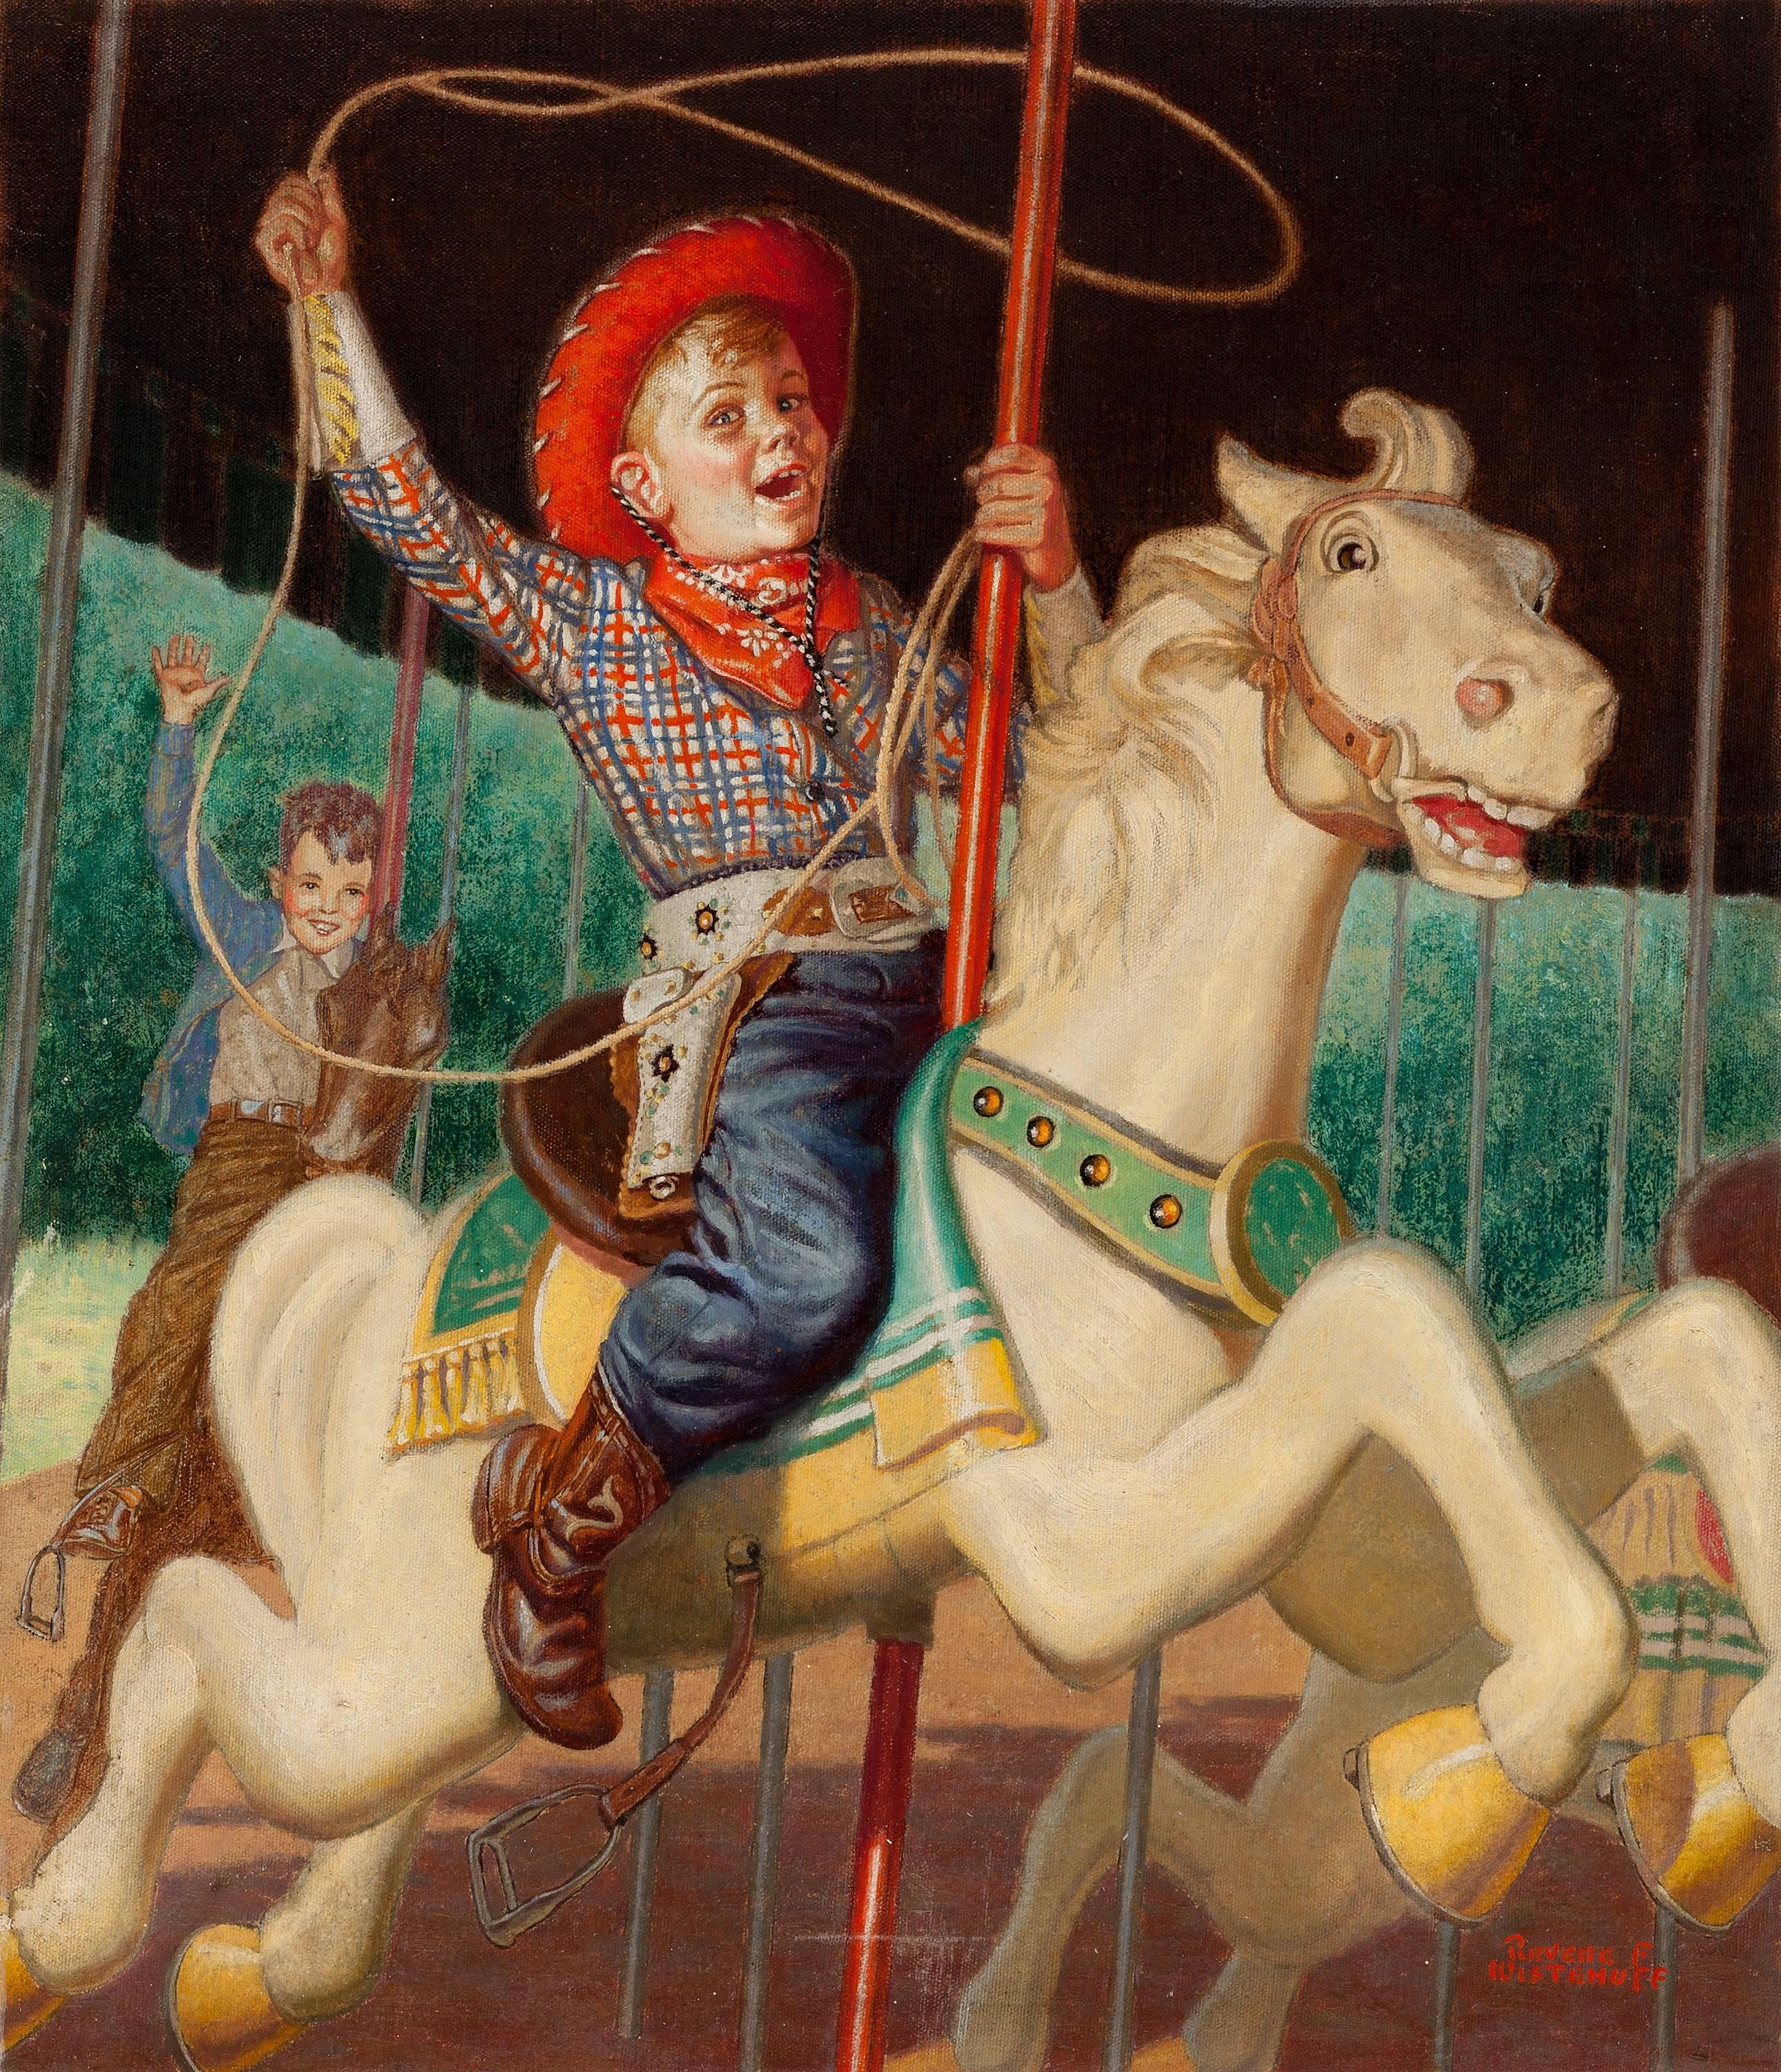 On the Merry-Go-Round - Painting by Revere Wistehuff